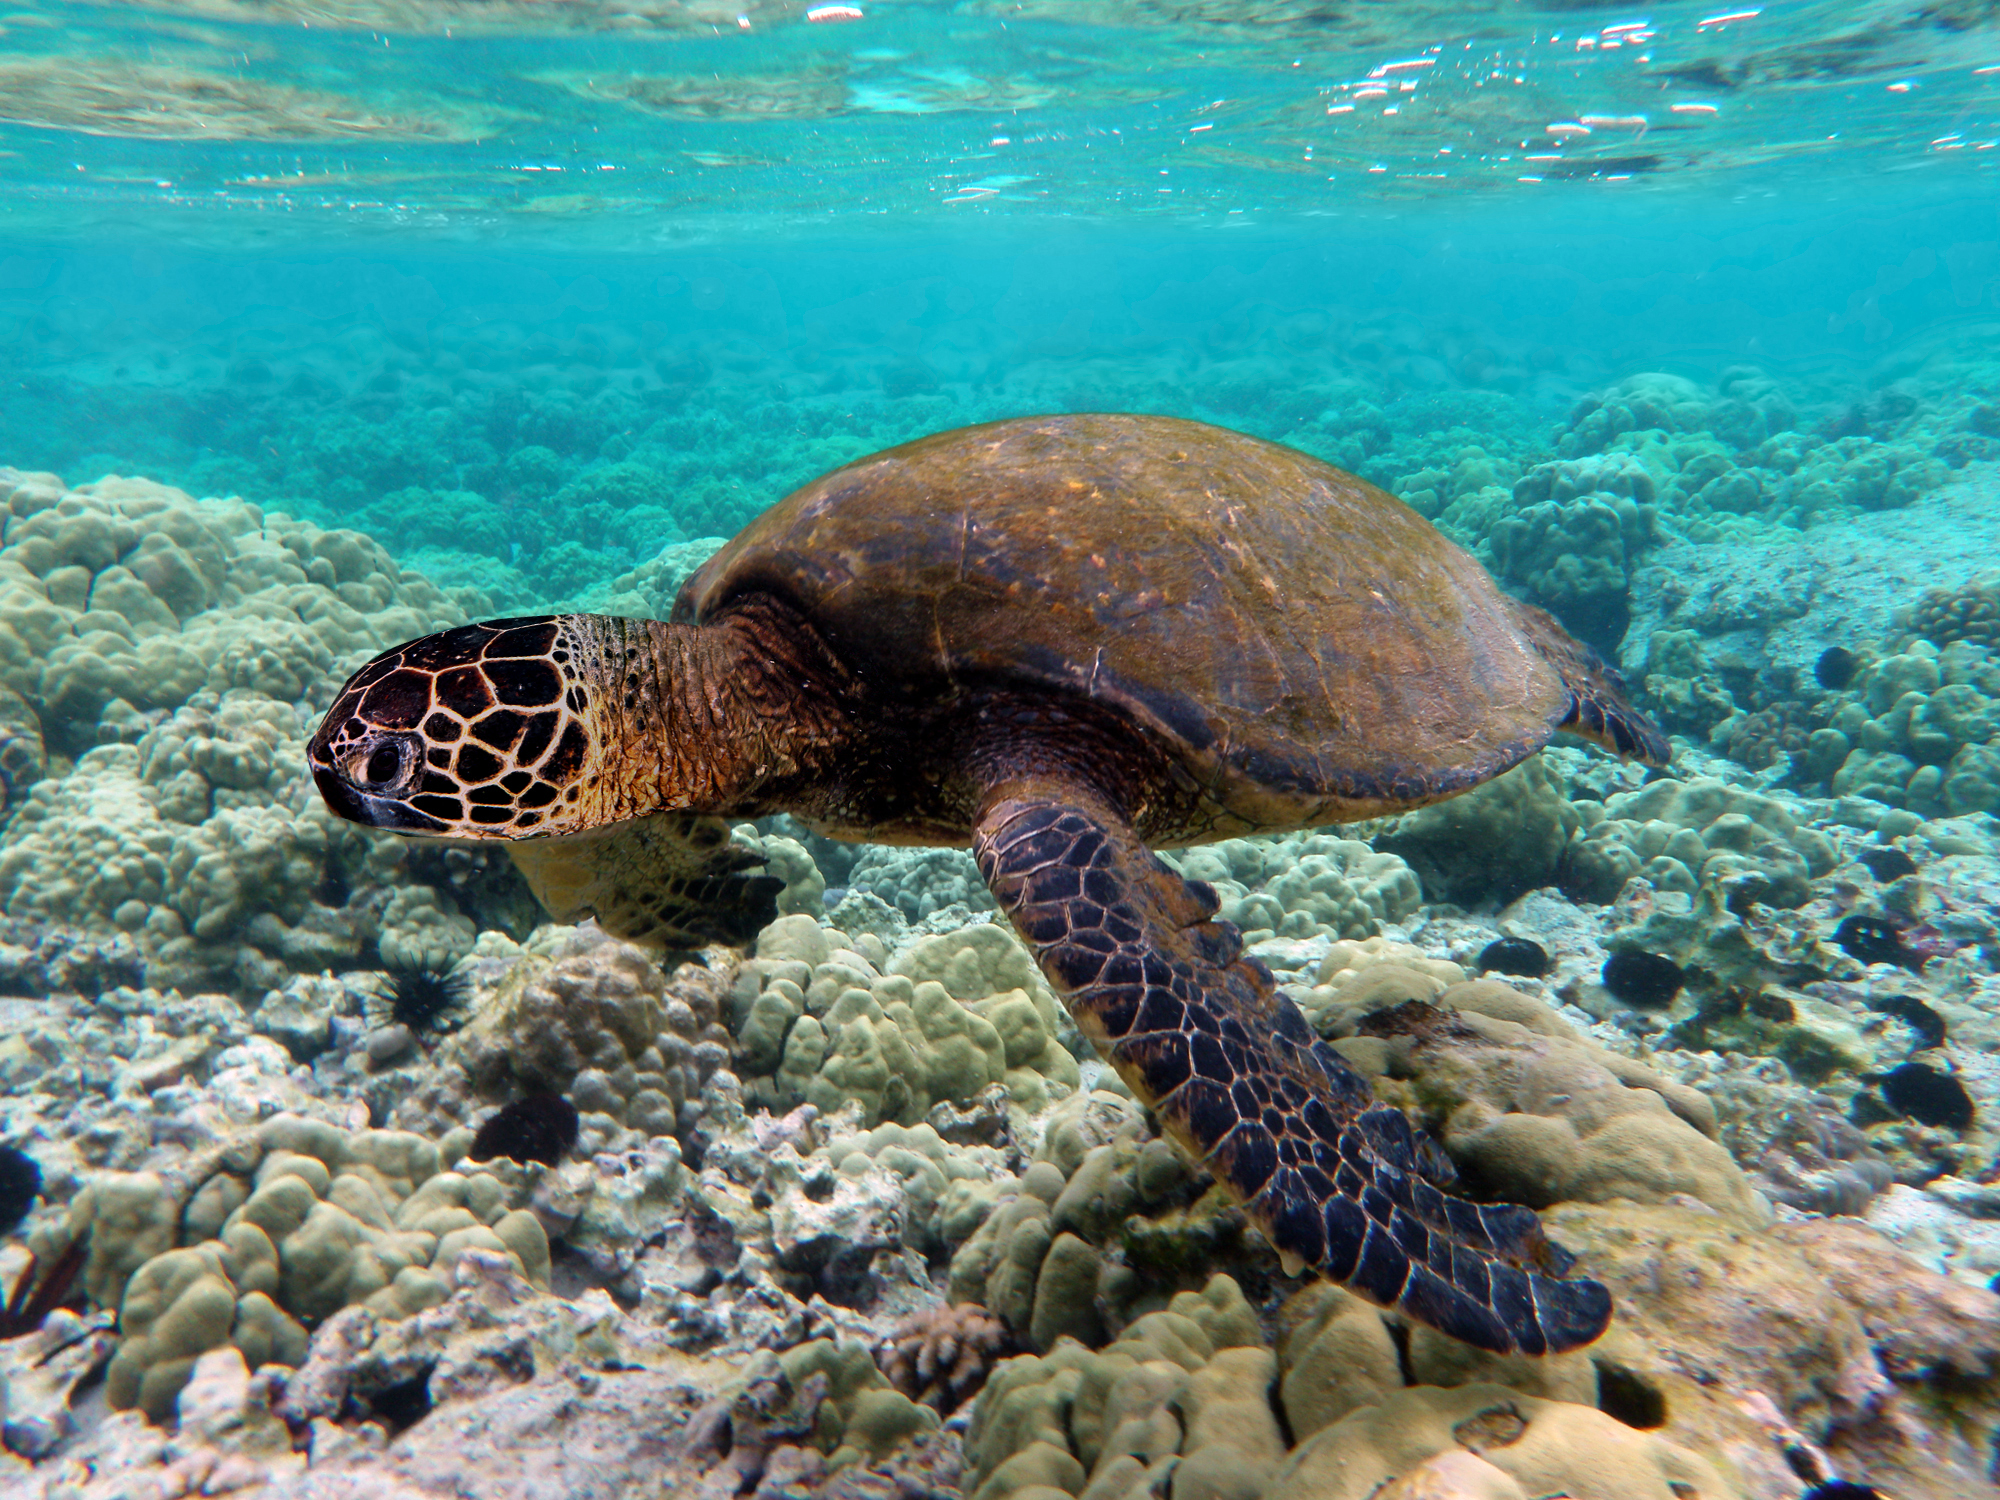 What is the common name for a green sea turtle?